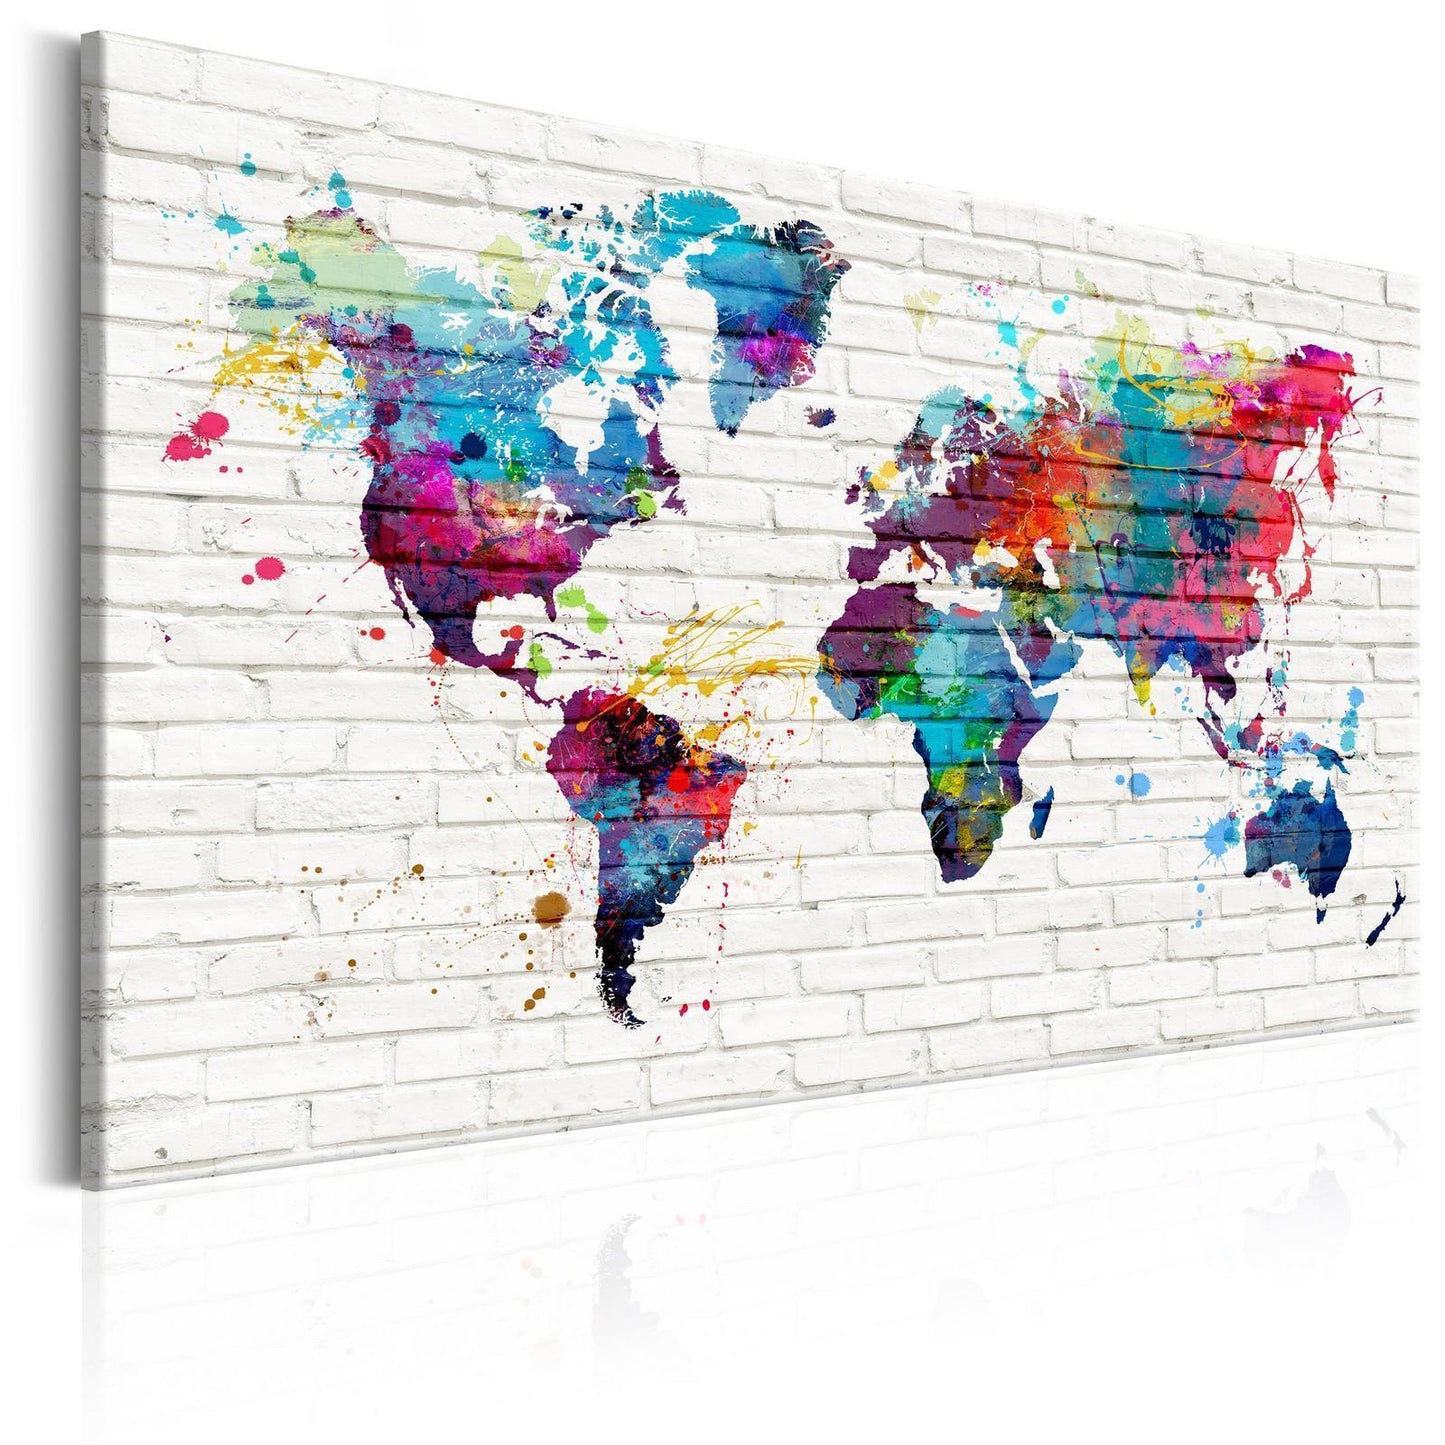 Image on cork - Walls of the World [Cork Map] 